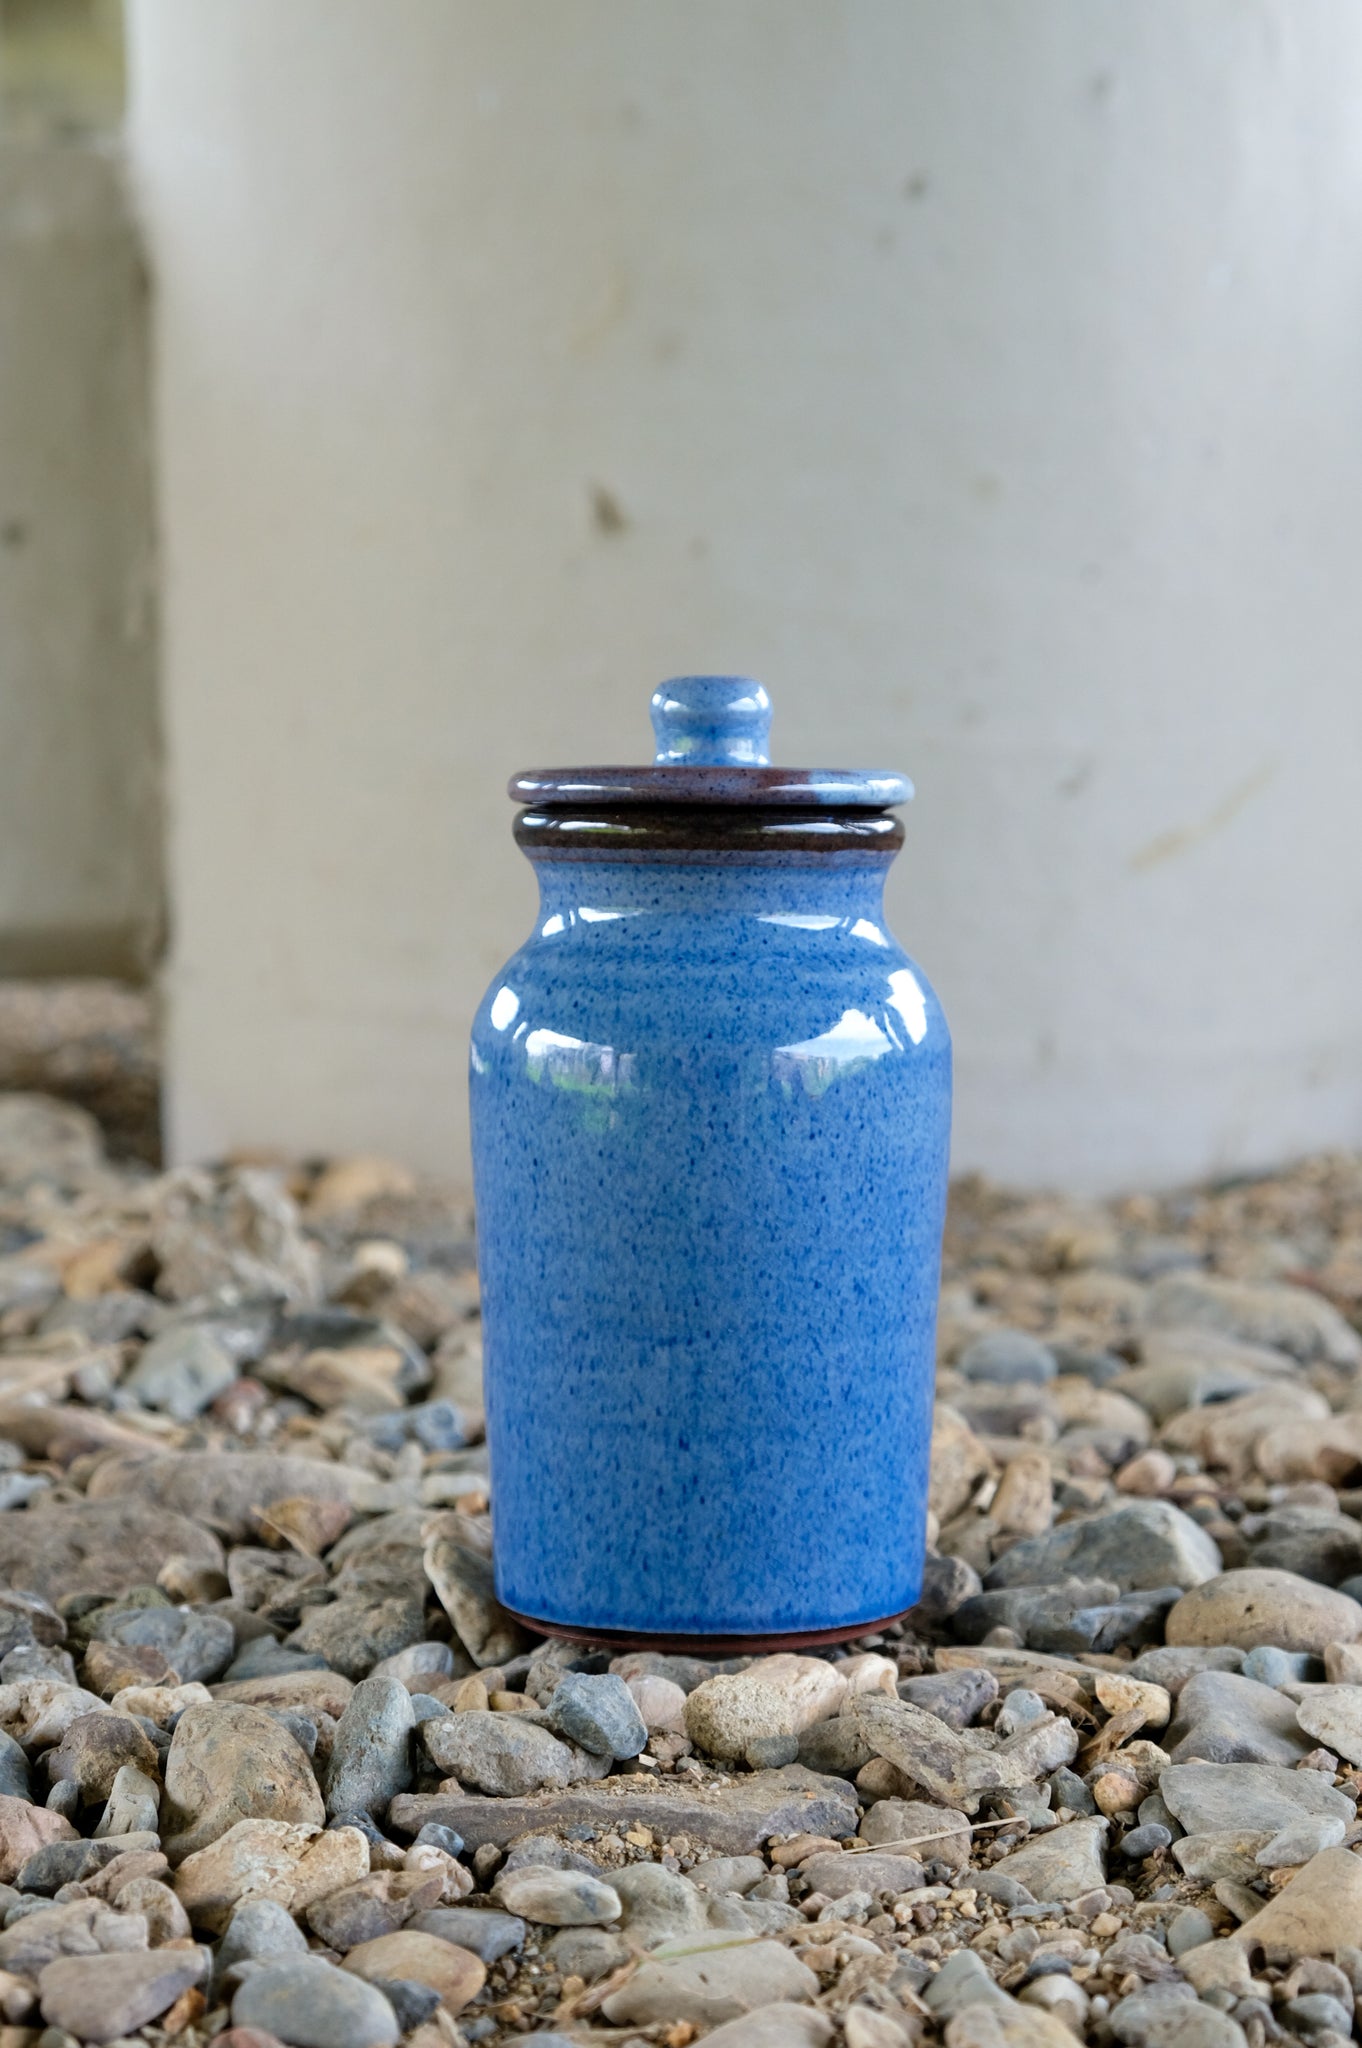 [40%OFF] TENDER Co. "HAND THROWN NATURAL RED CLAY JAR / BLUE"